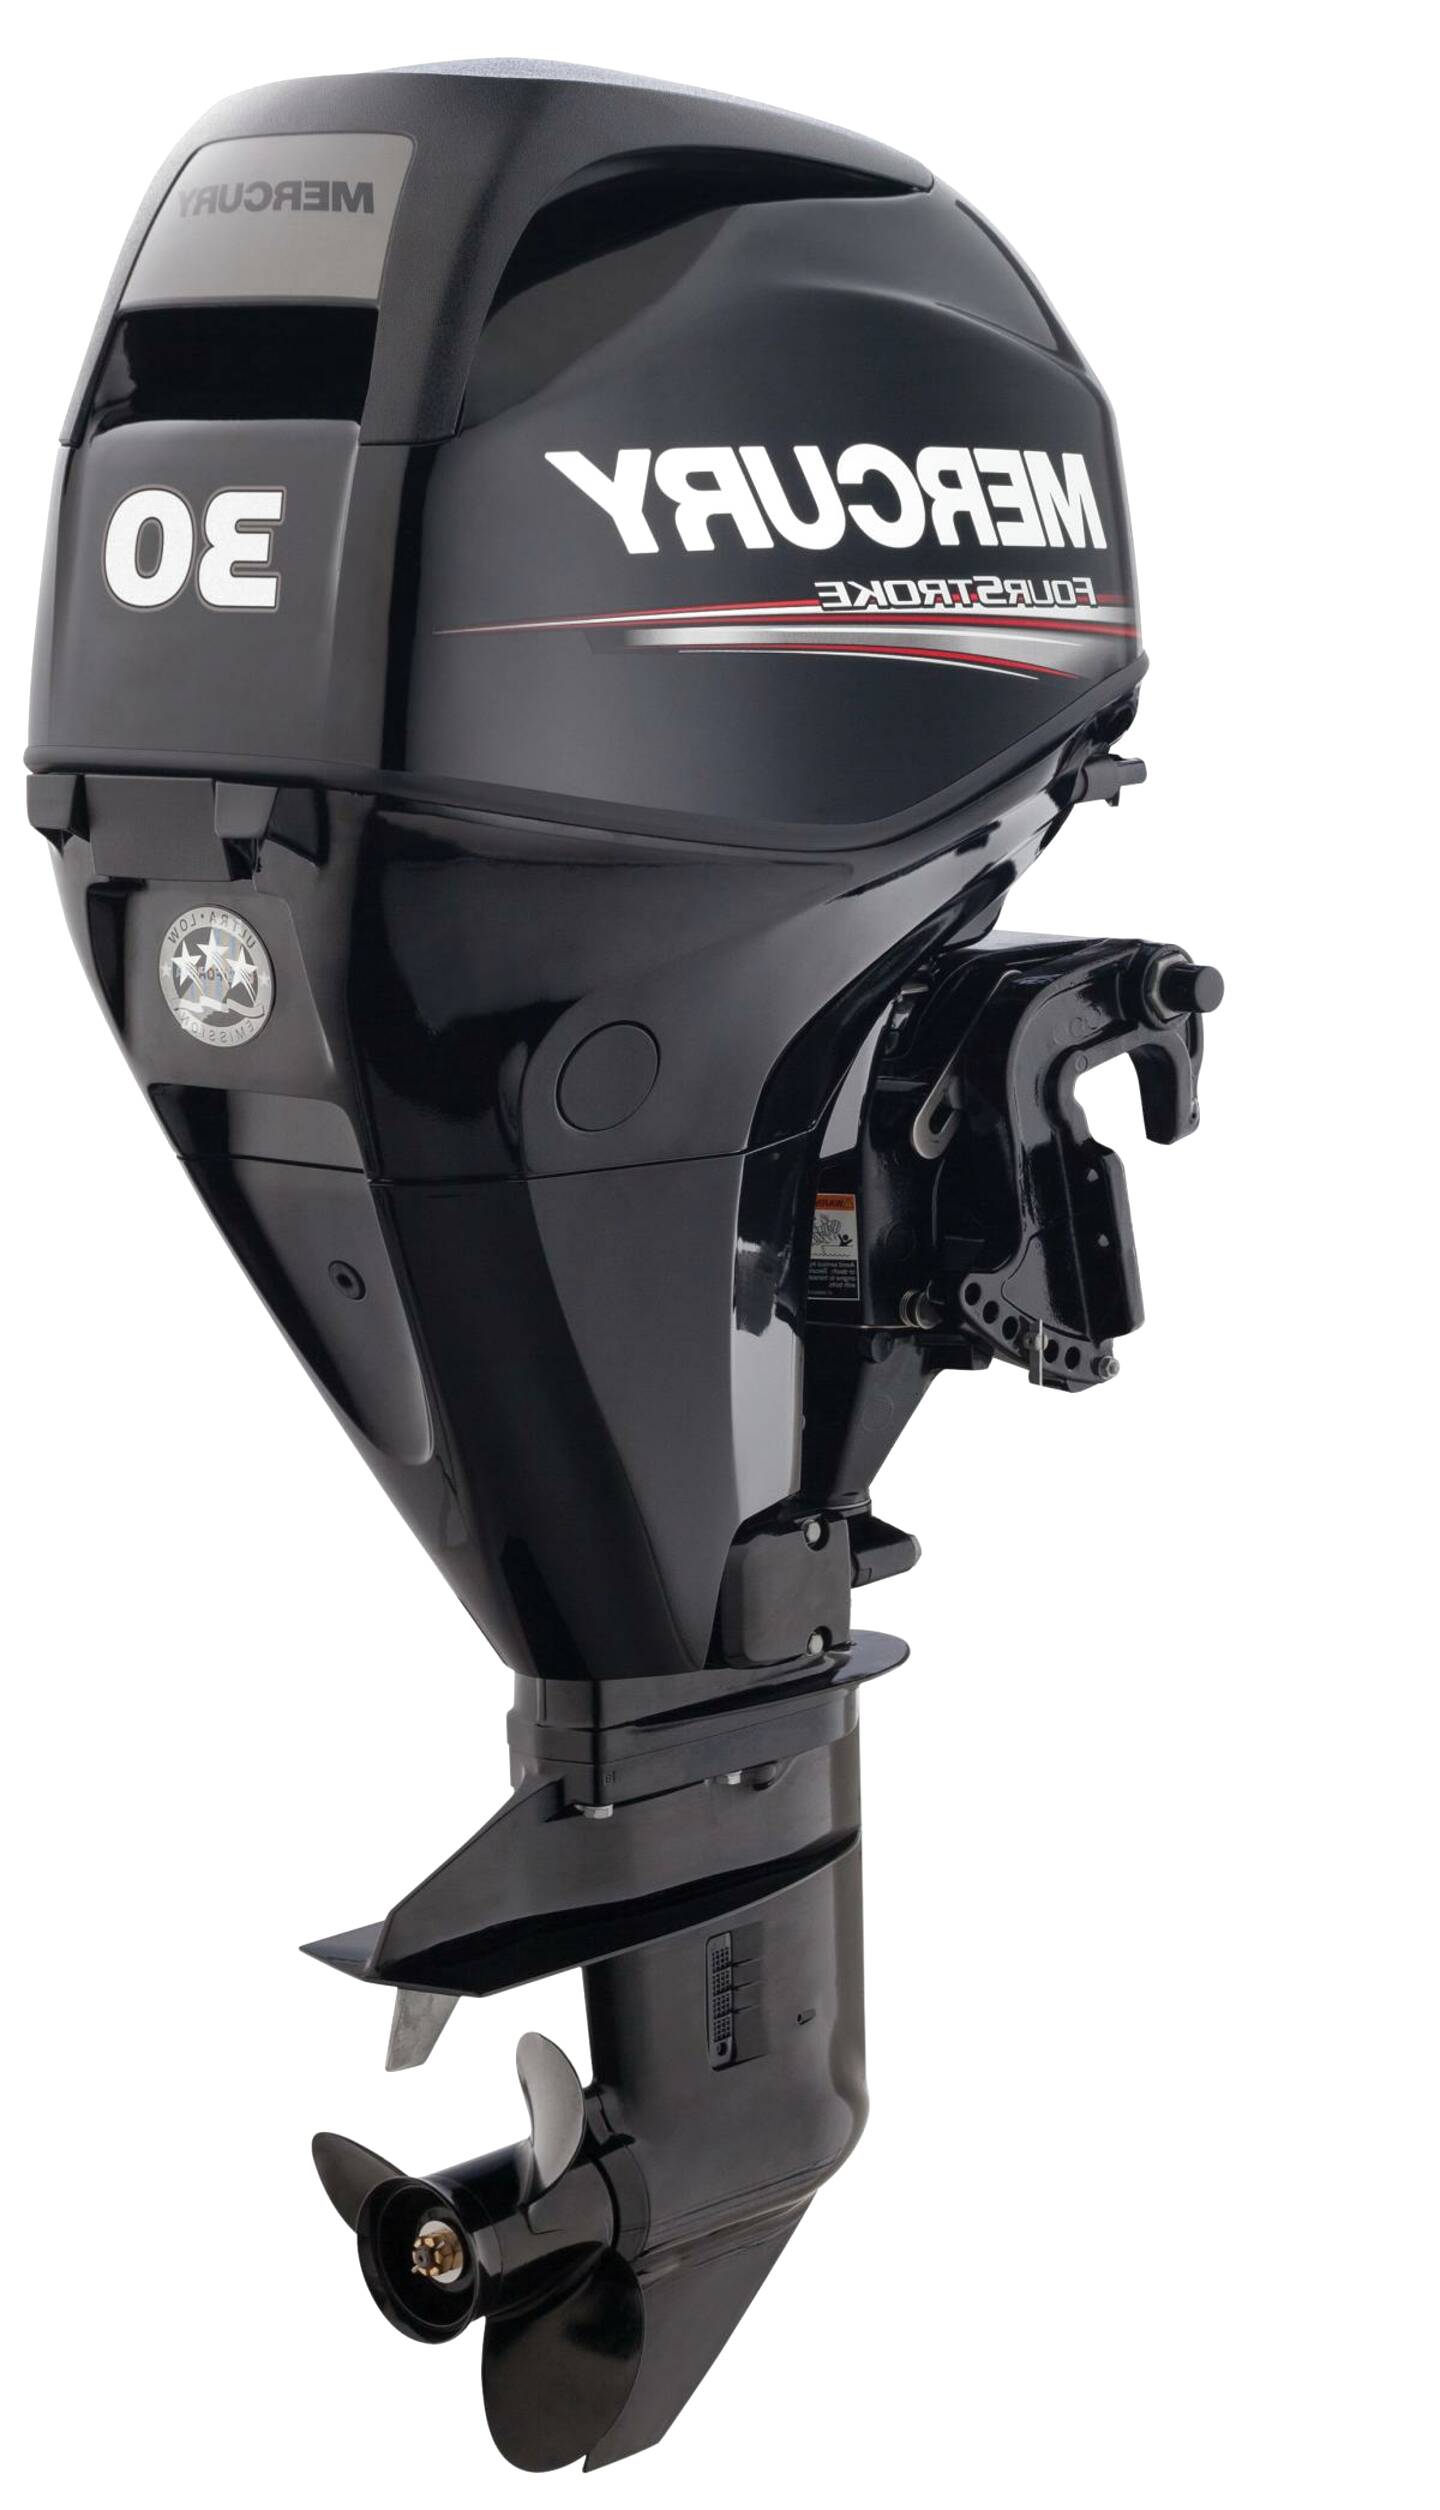 Hp mercury outboard price